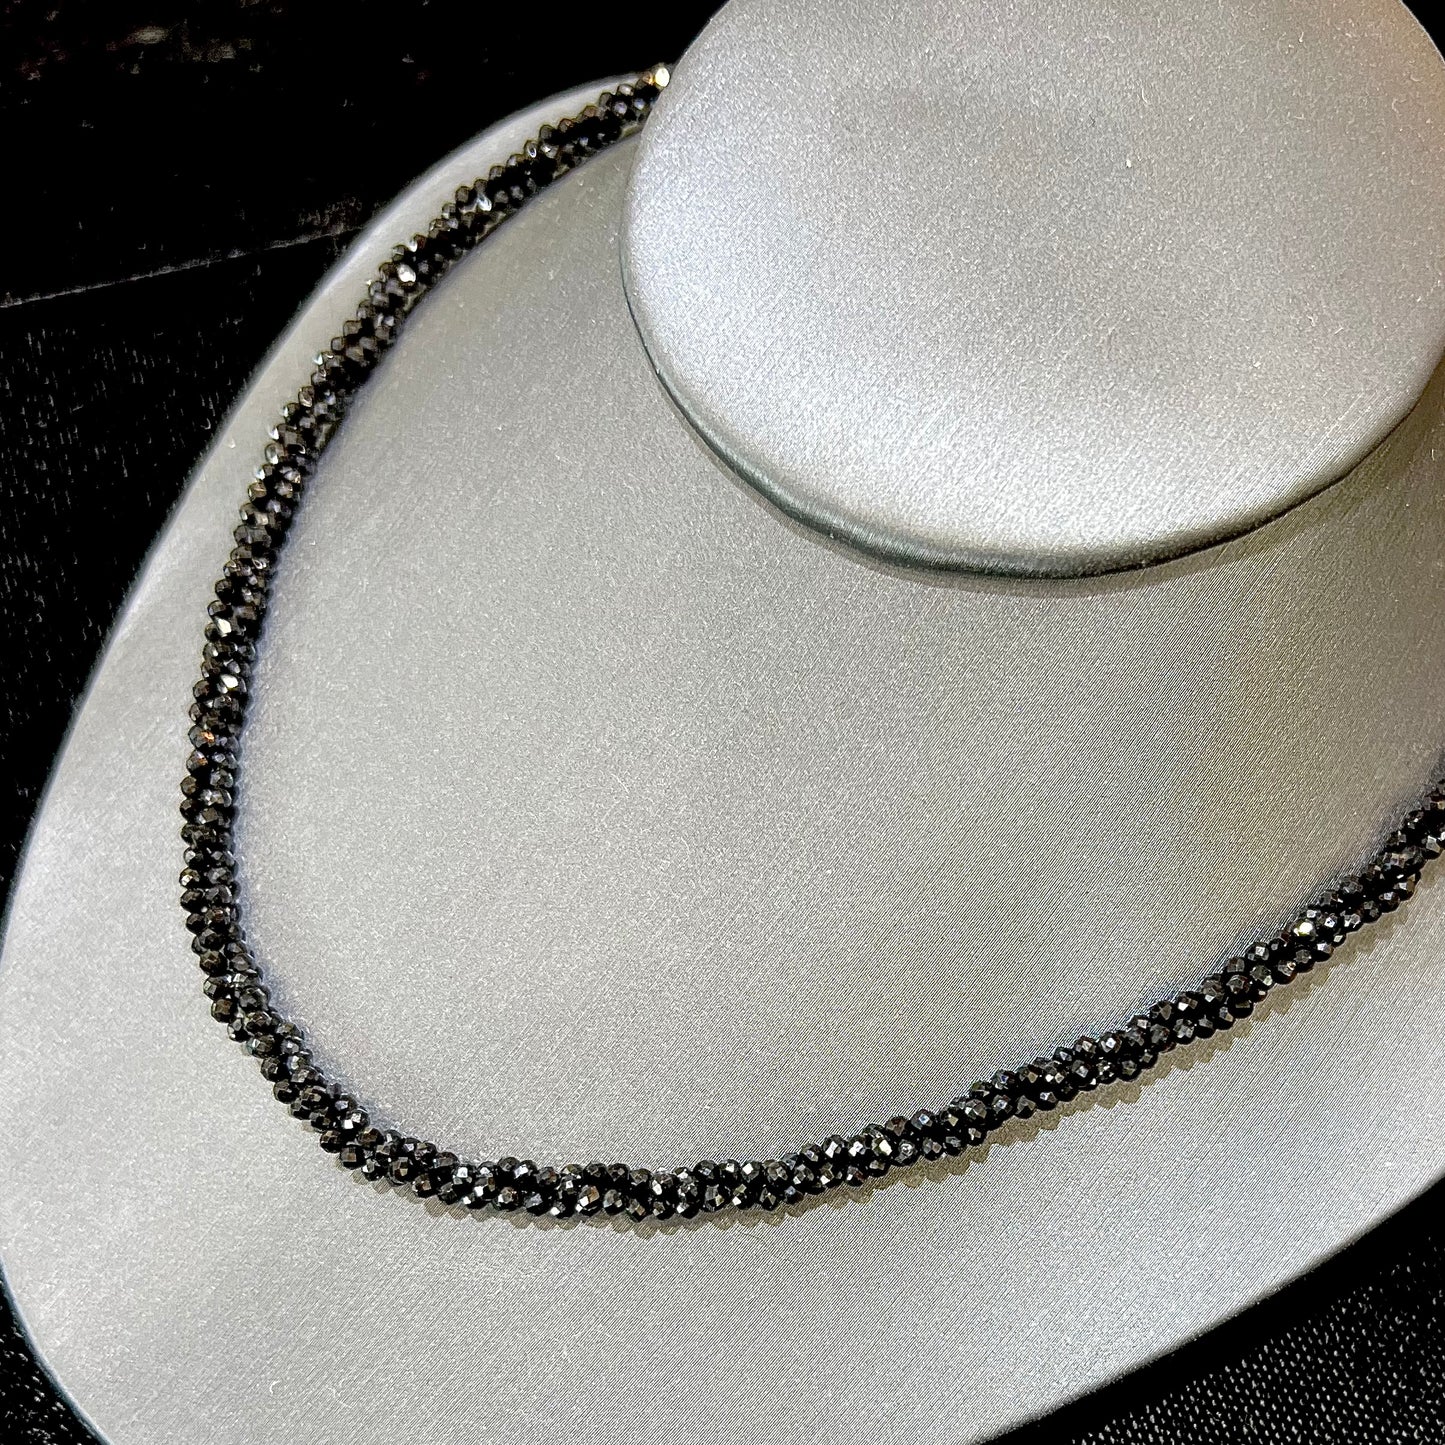 Necklace - Black and white spinel and clay beads – Soup to Nuts, Inc